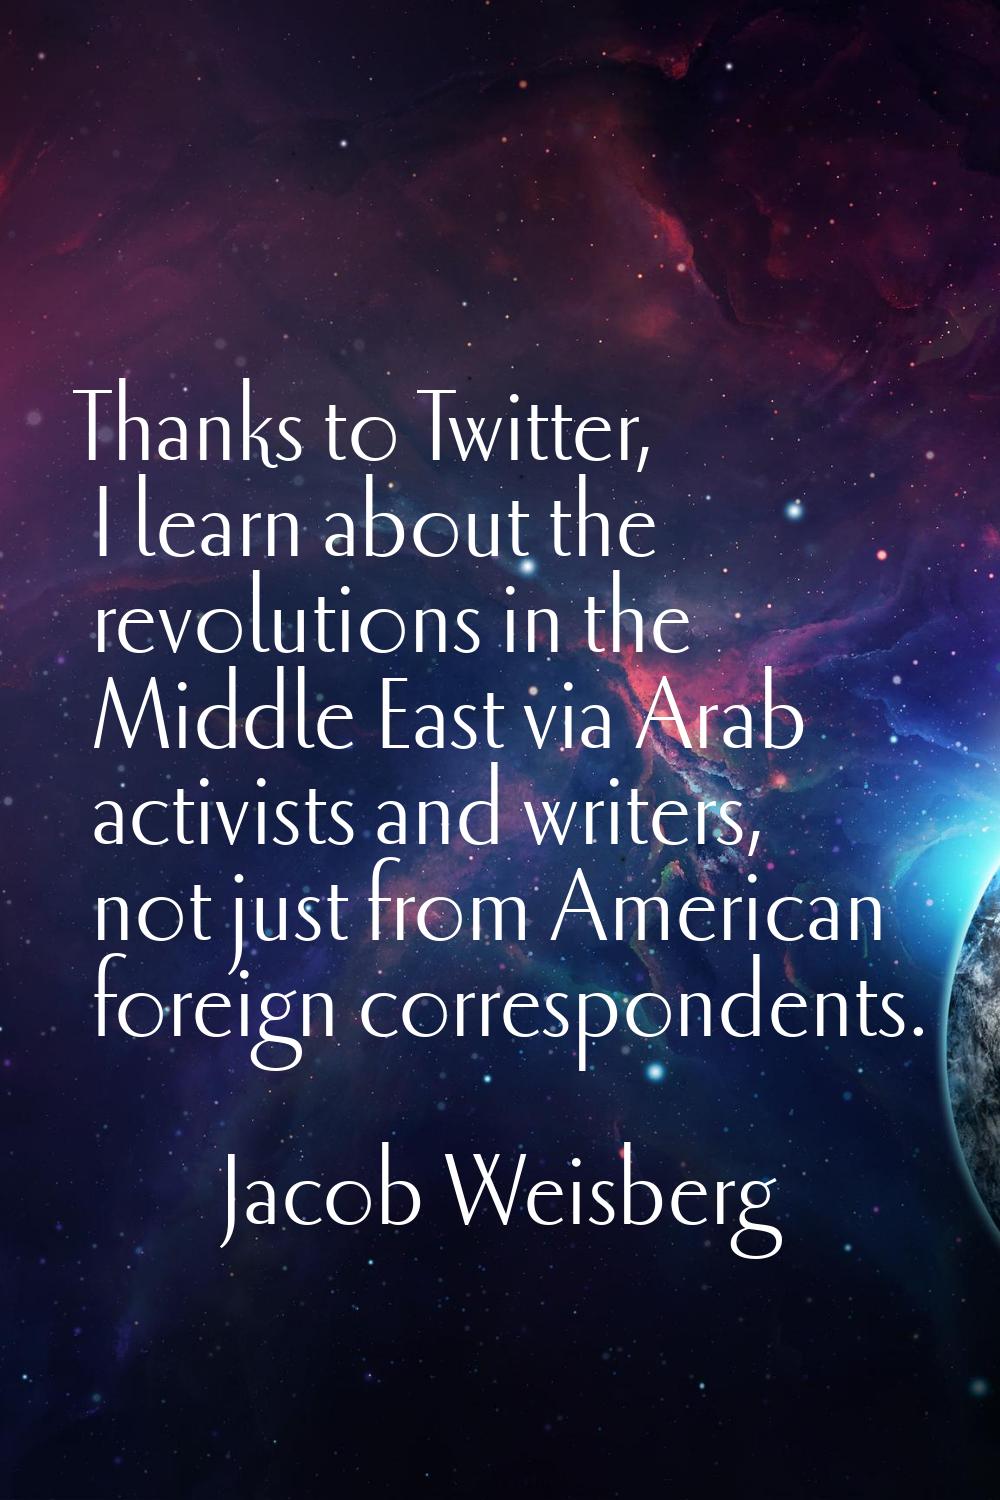 Thanks to Twitter, I learn about the revolutions in the Middle East via Arab activists and writers,